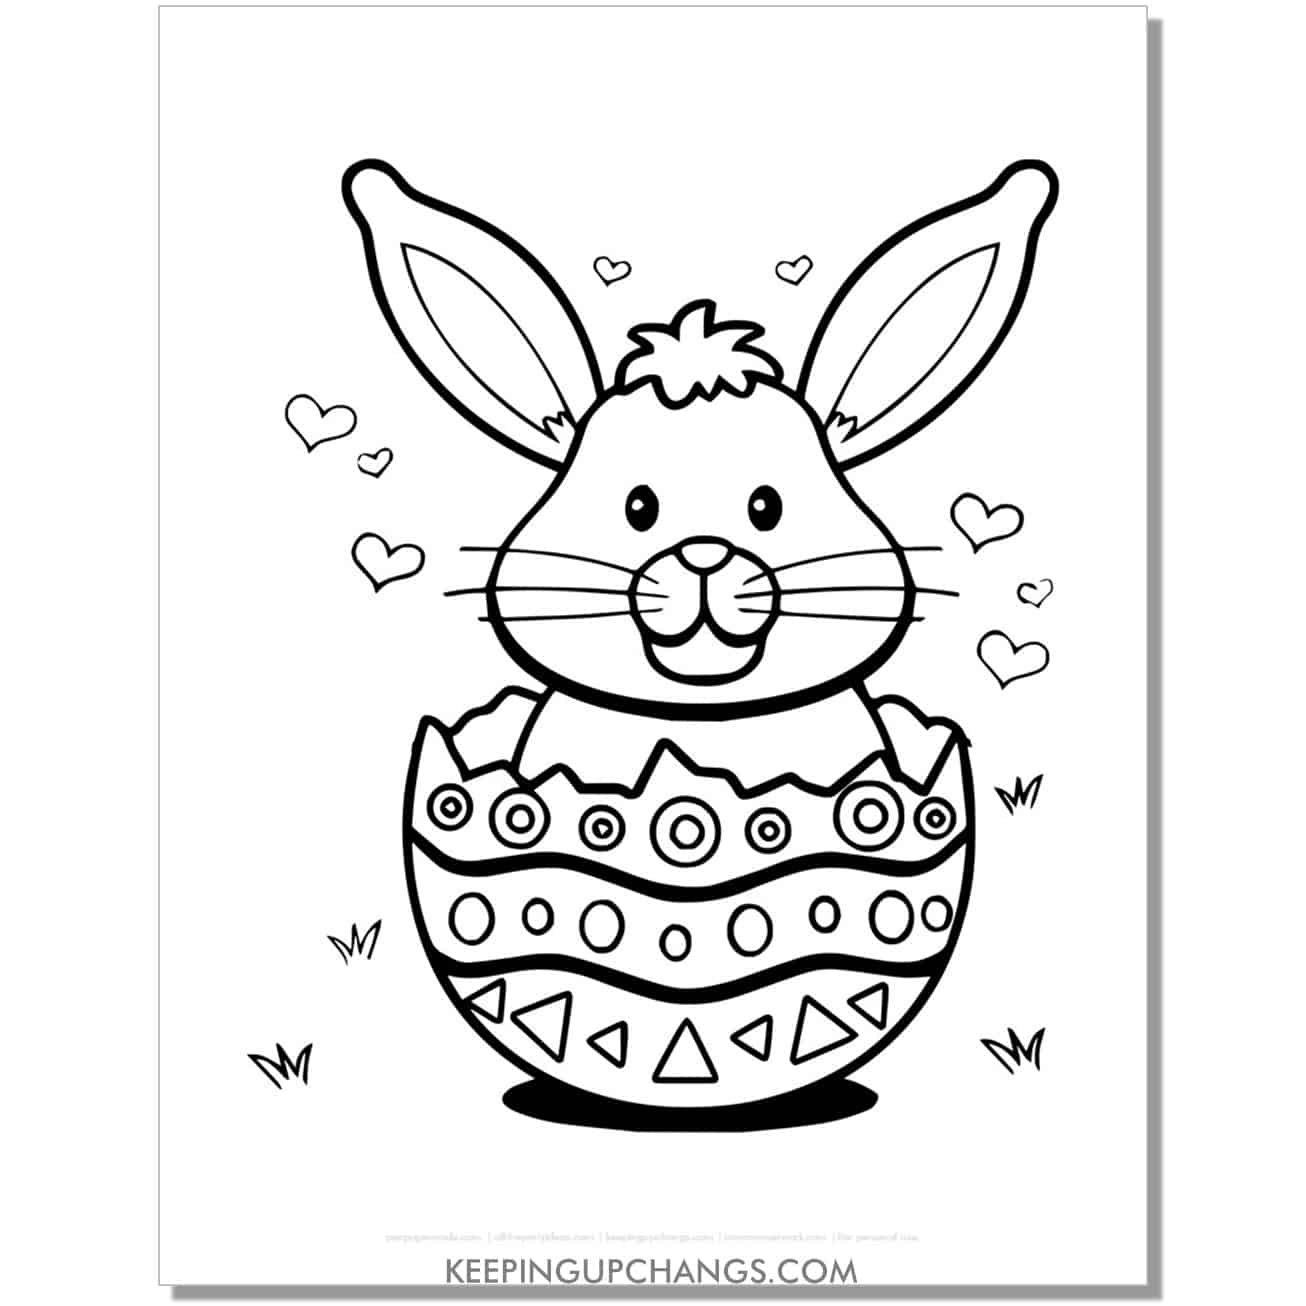 easter bunny inside egg coloring page, sheet.